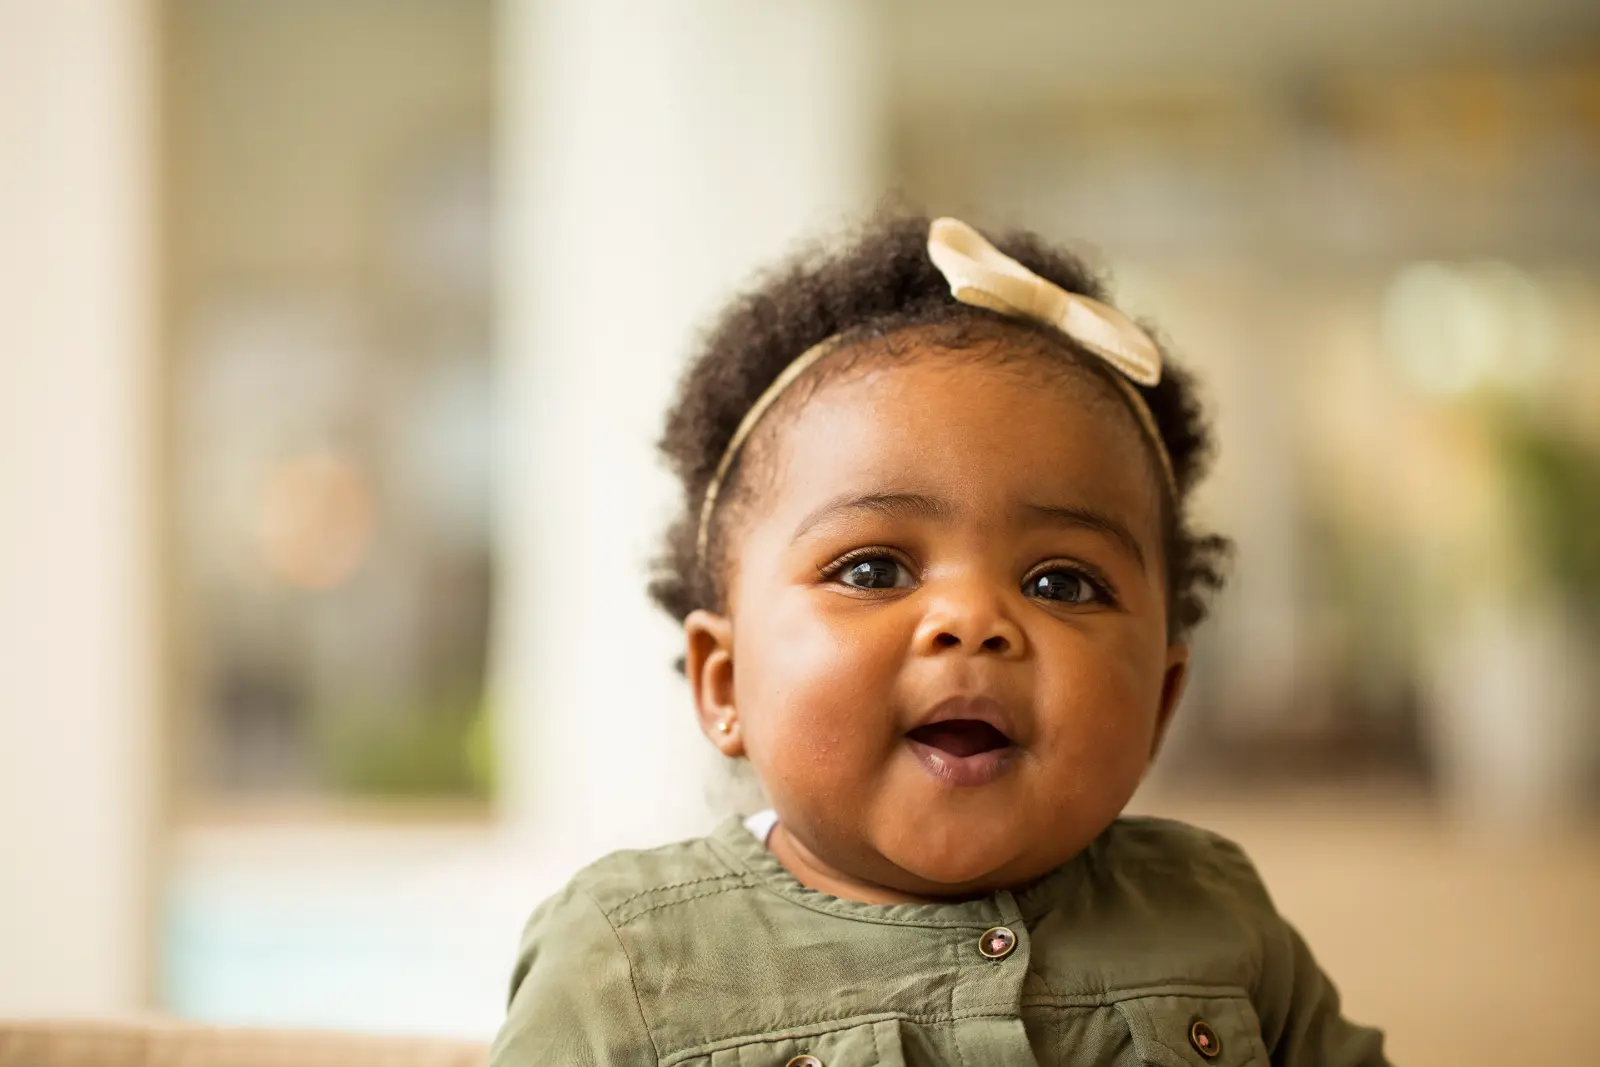 Adoption Contact Agreements Affect Emotions: Adorable portrait of a baby adorned with a cute headband, capturing the emotional essence of adoption.